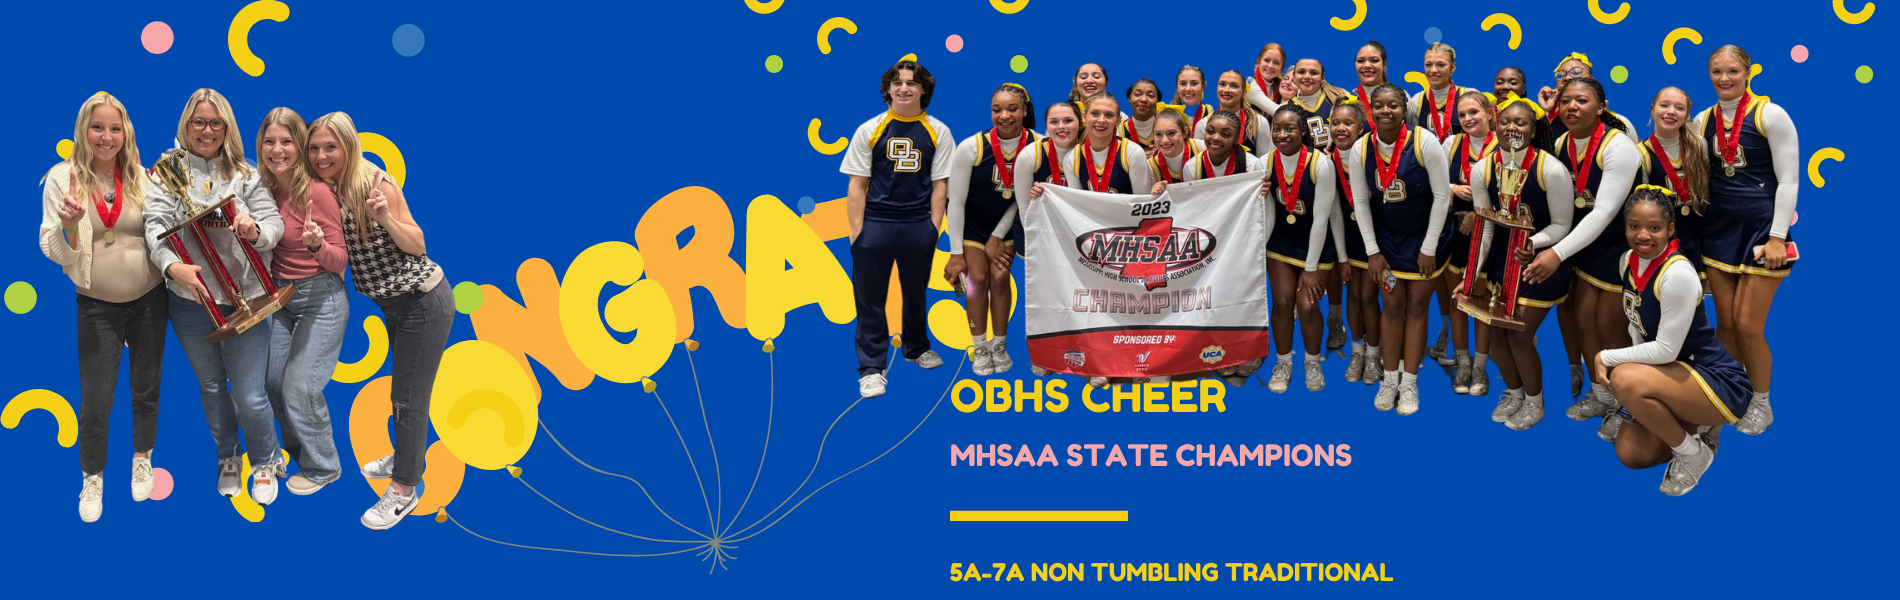 OBHS Cheer State Champions